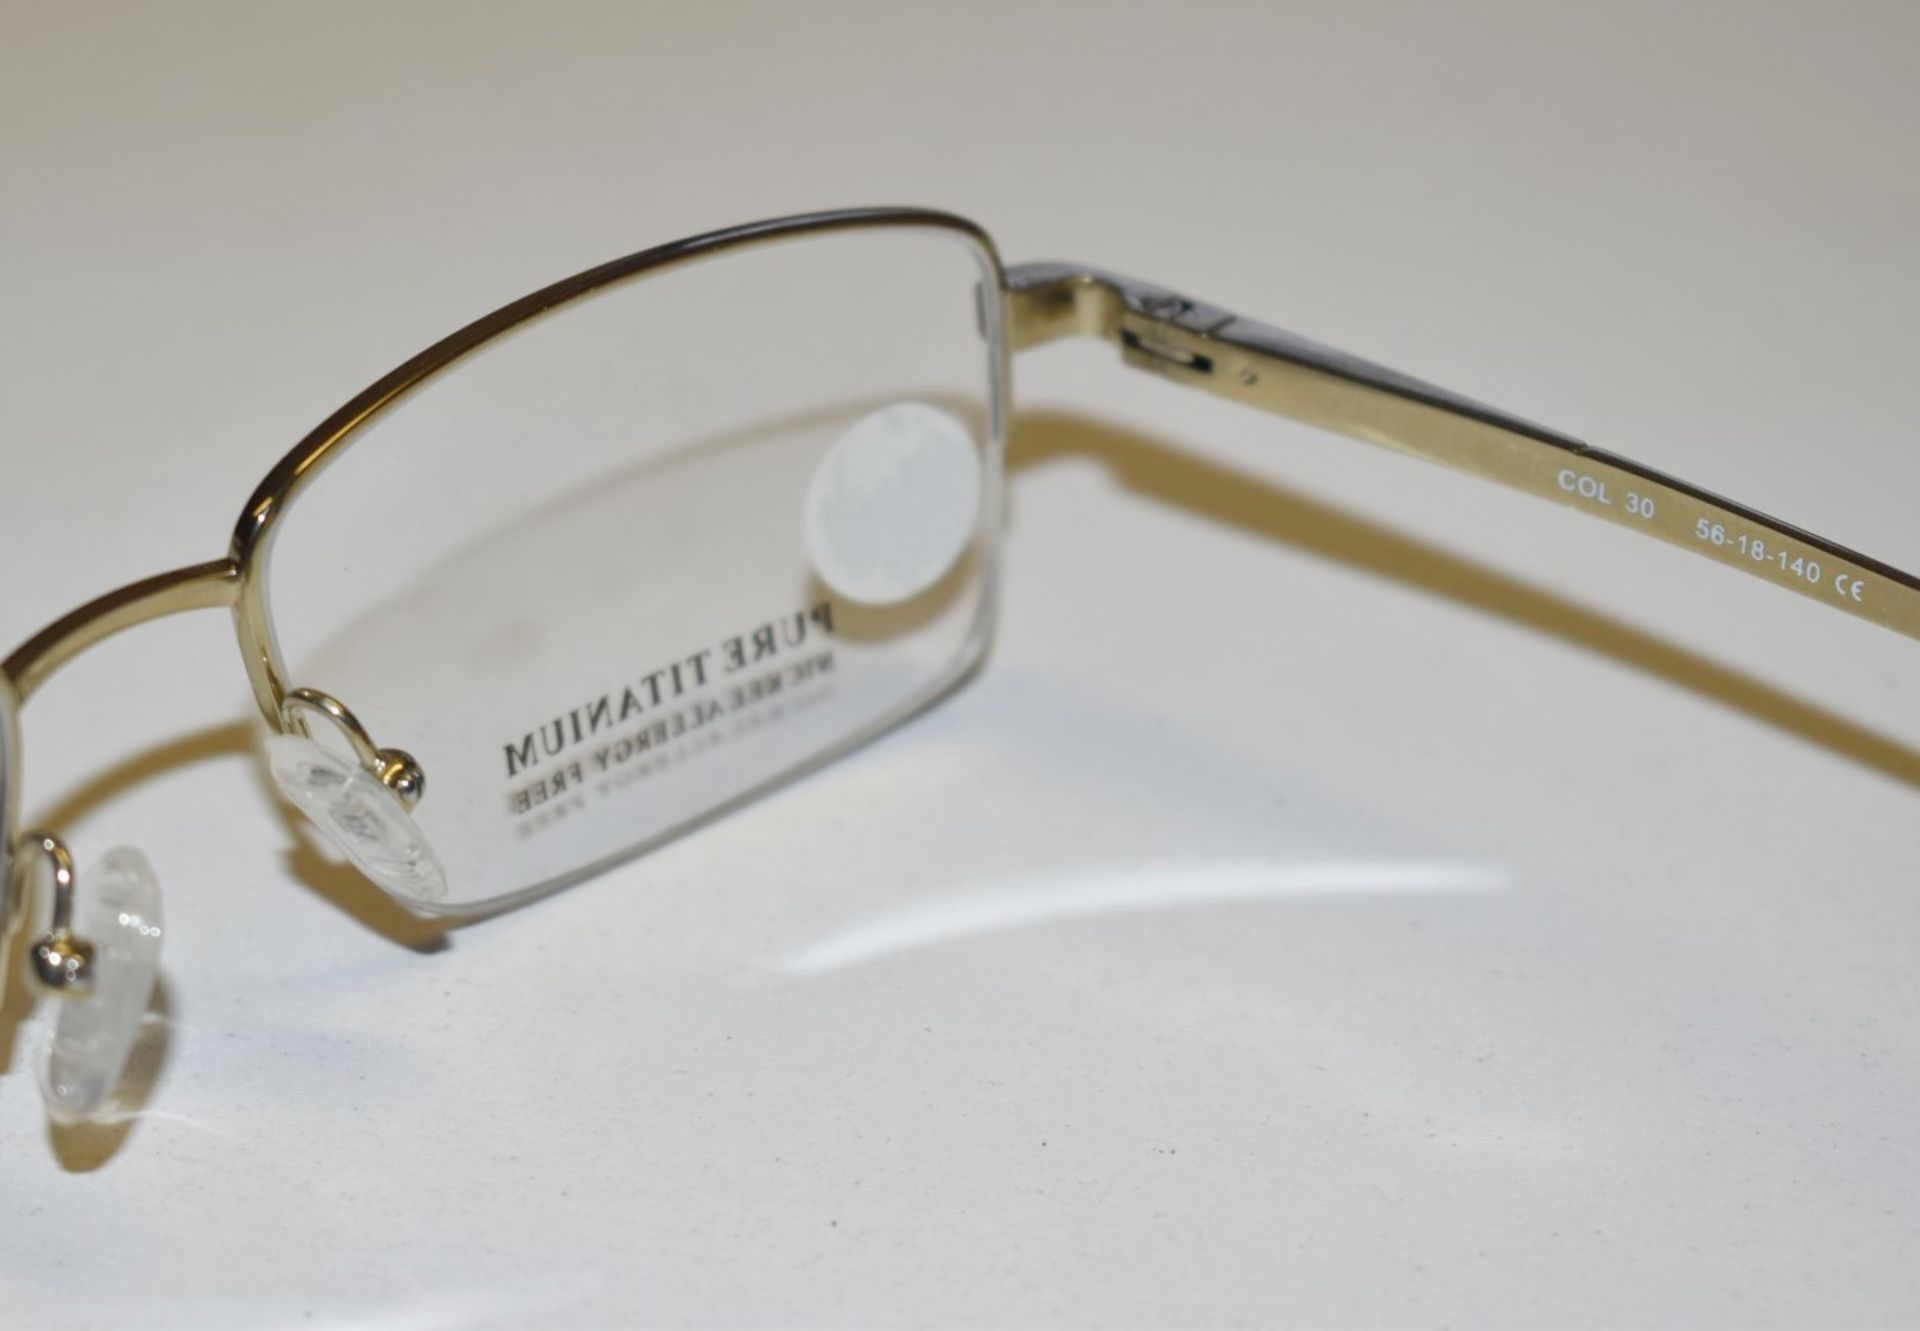 1 x Genuine FERUCCI Spectacle Eye Glasses Frame - Ex Display Stock  - Ref: GTI182 - CL645 - - Image 7 of 12